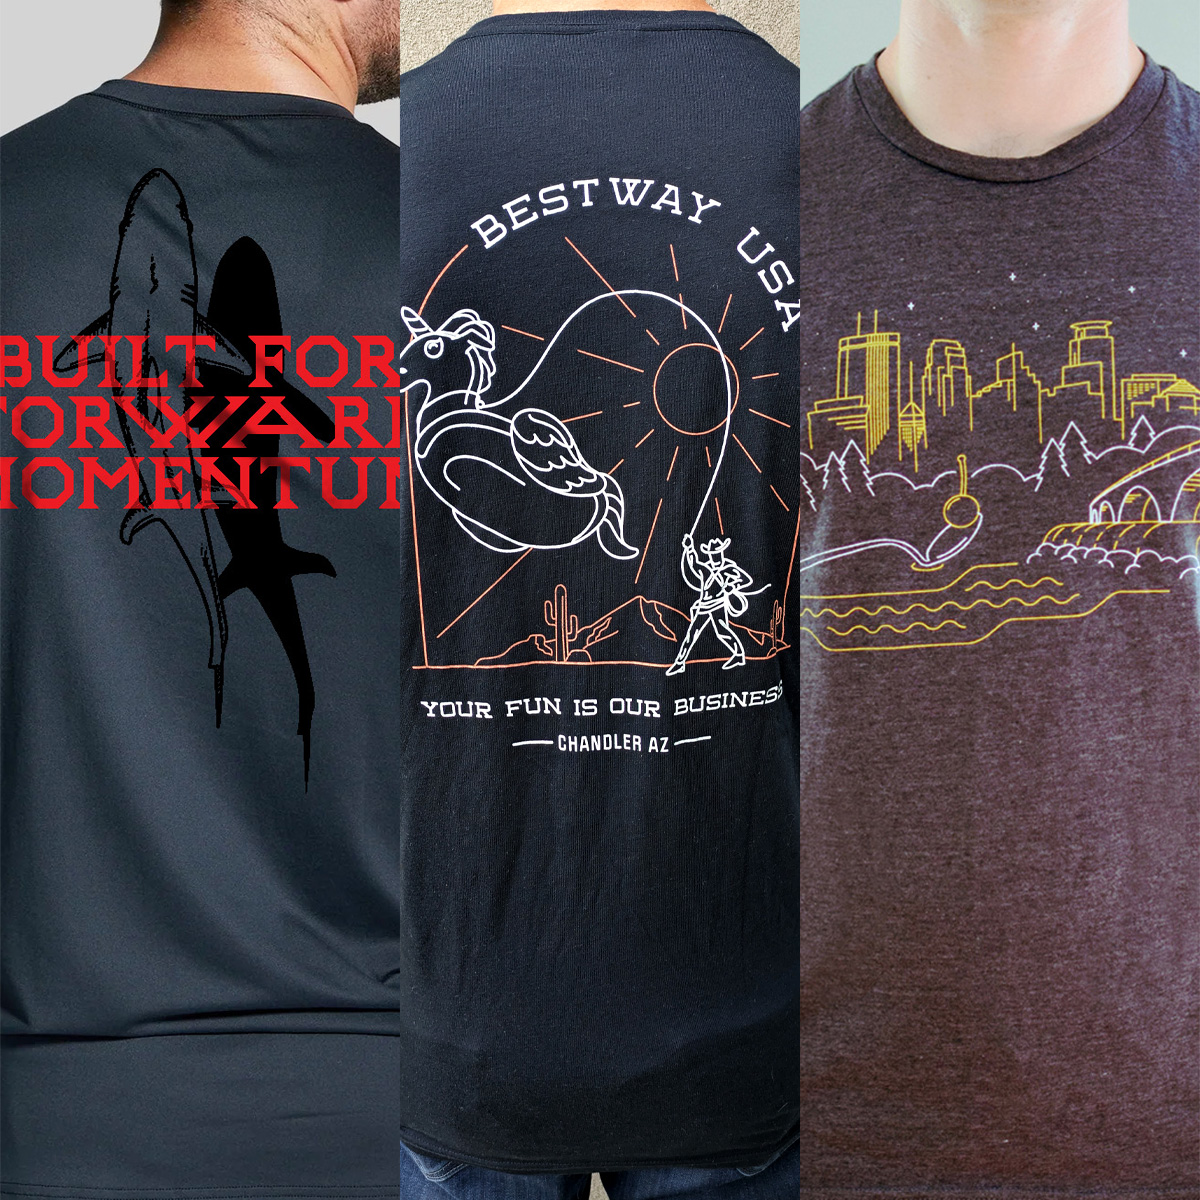 Three graphic tee designs shown on 3 different mens' shirts.